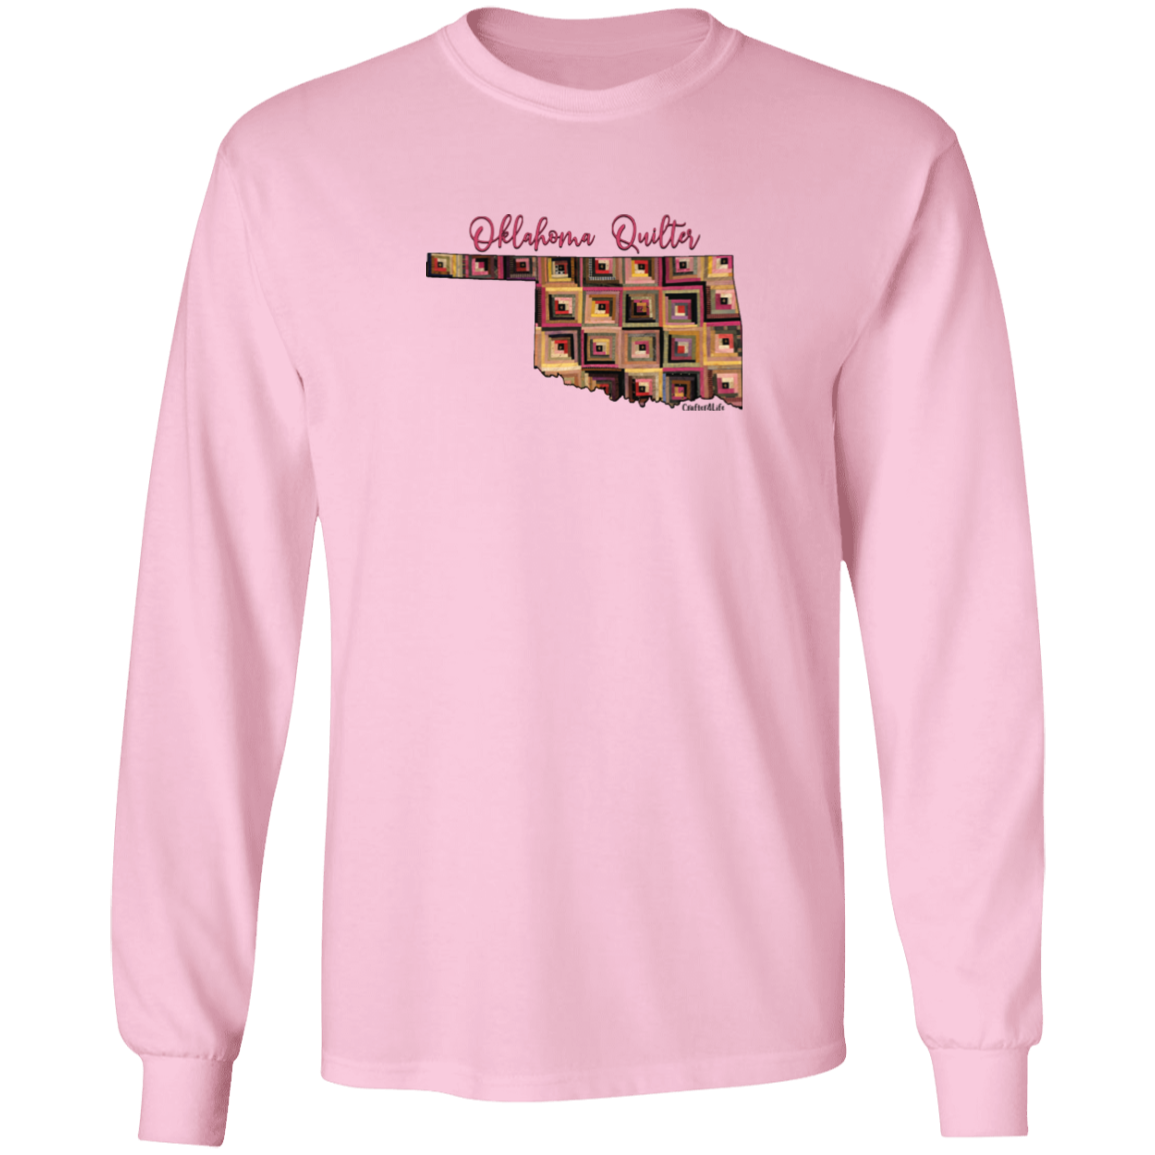 Oklahoma Quilter Long Sleeve T-Shirt, Gift for Quilting Friends and Family